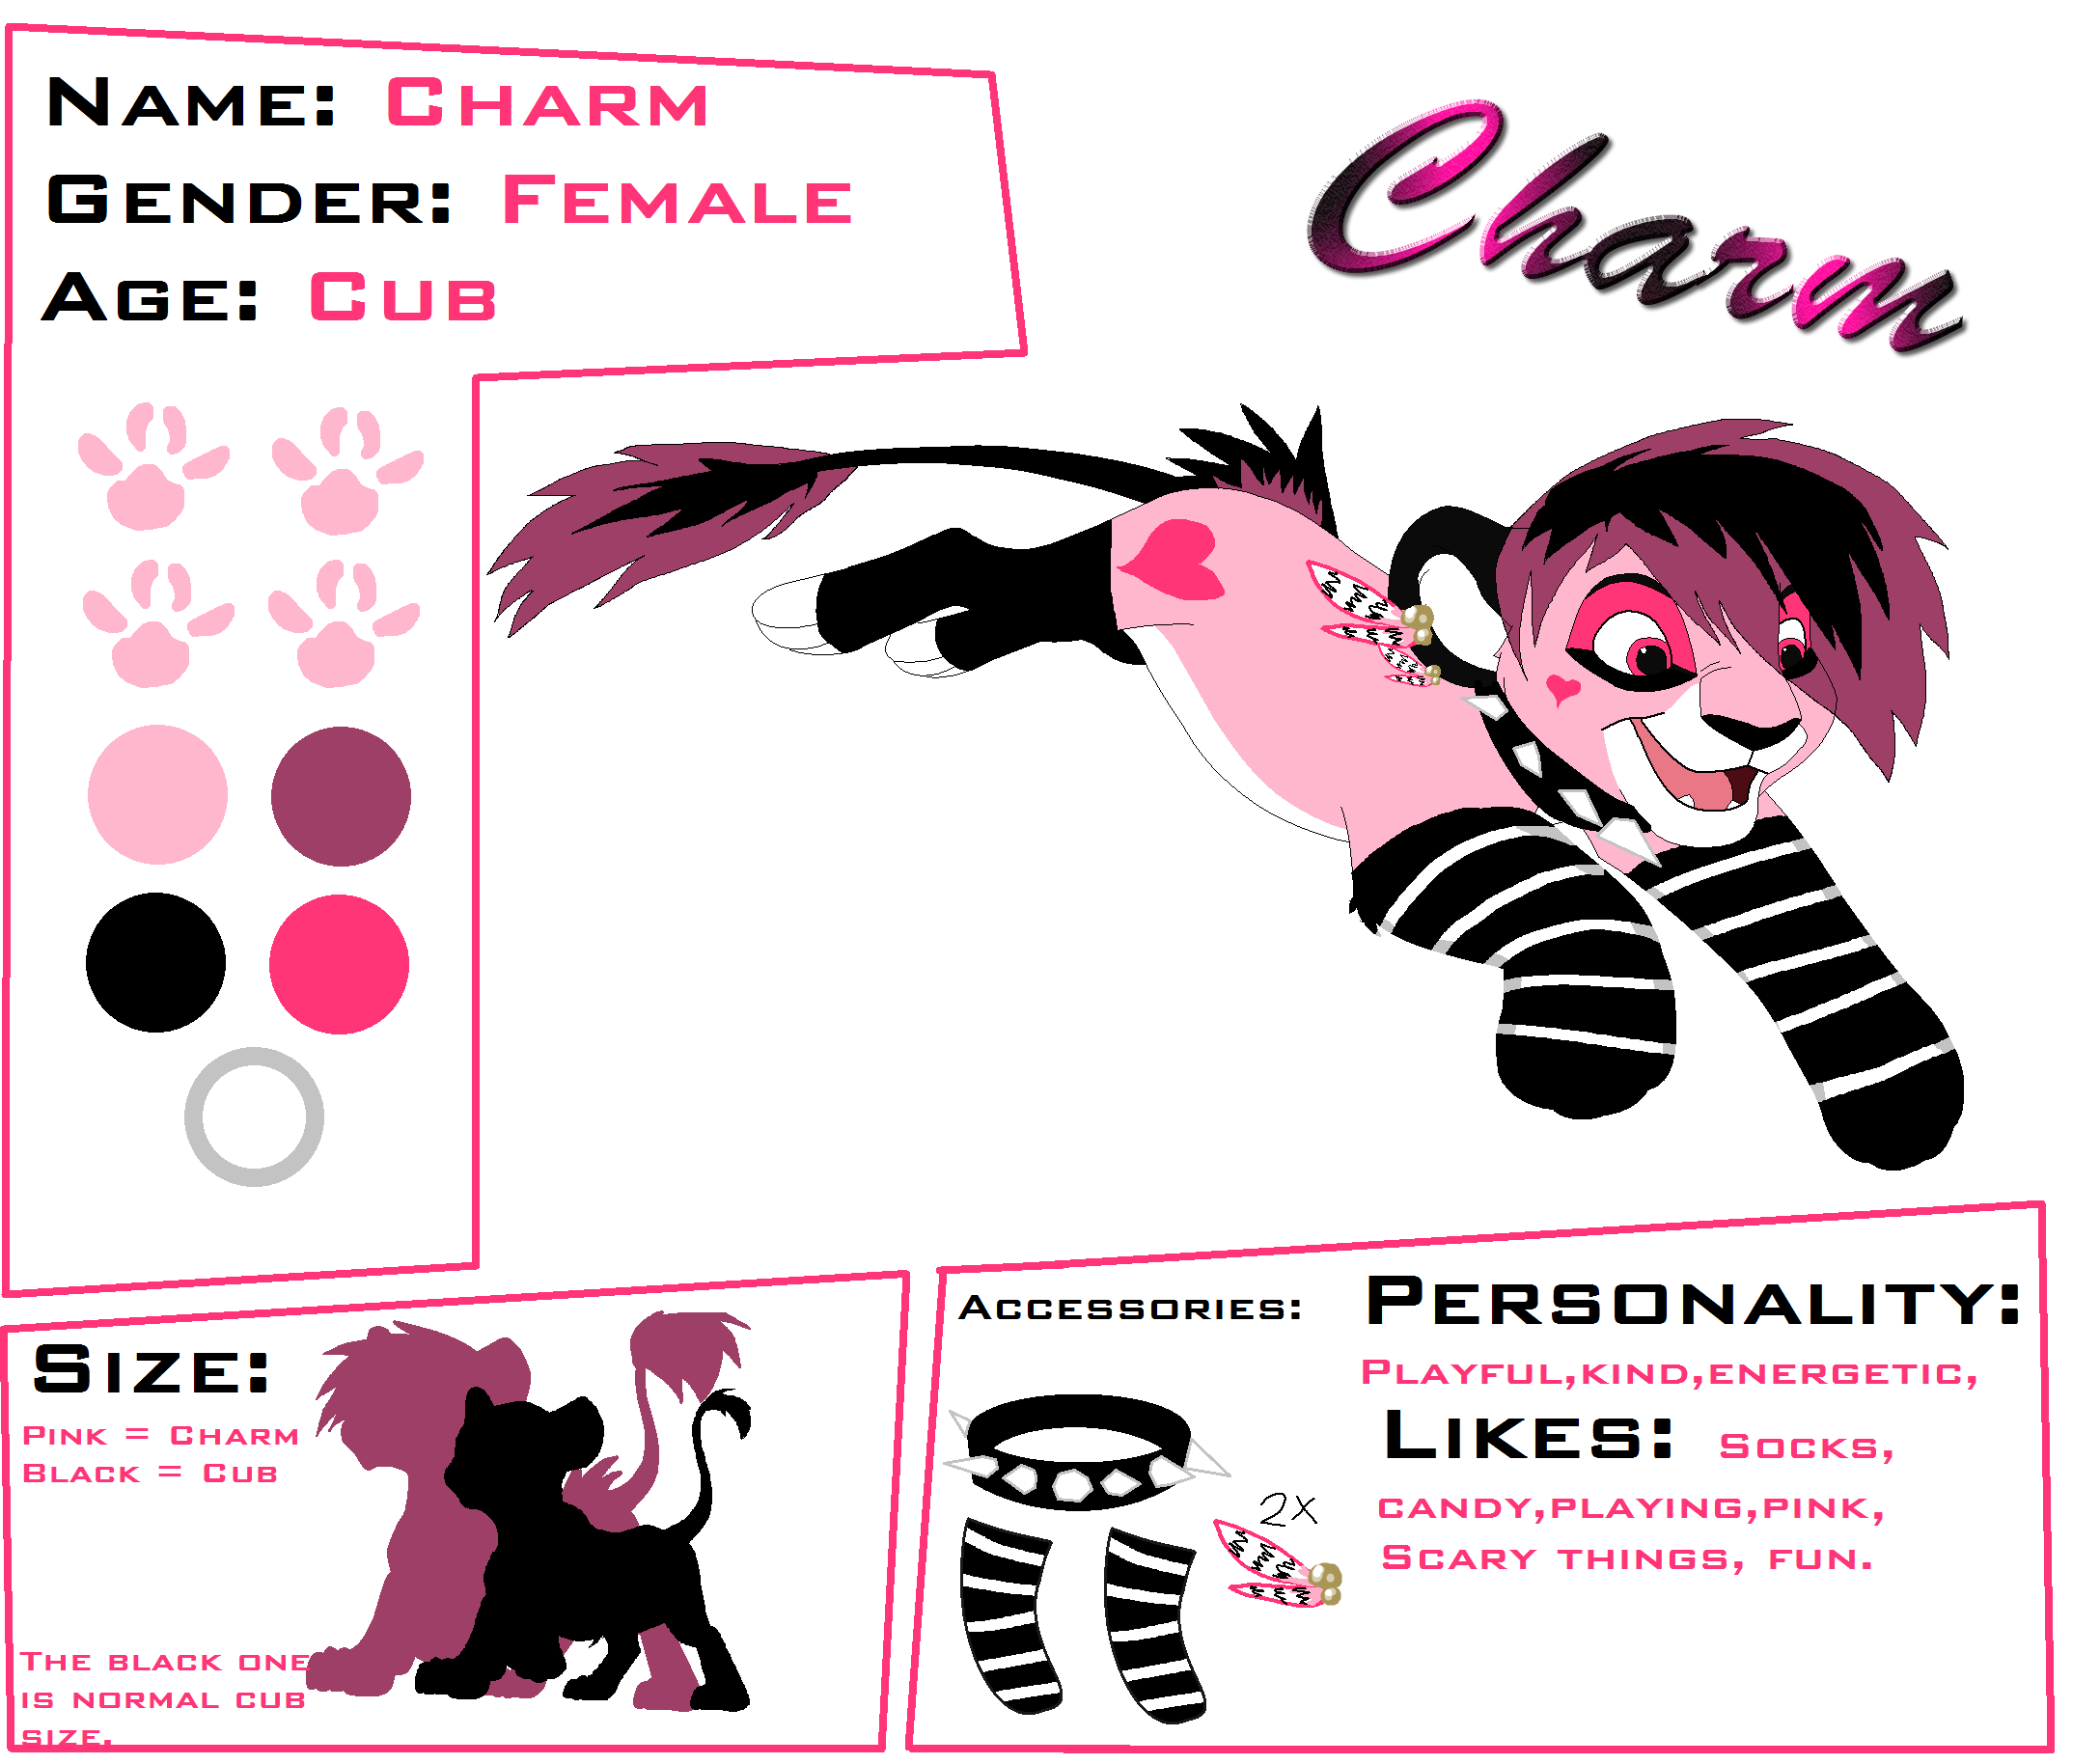 Charm reference sheet.